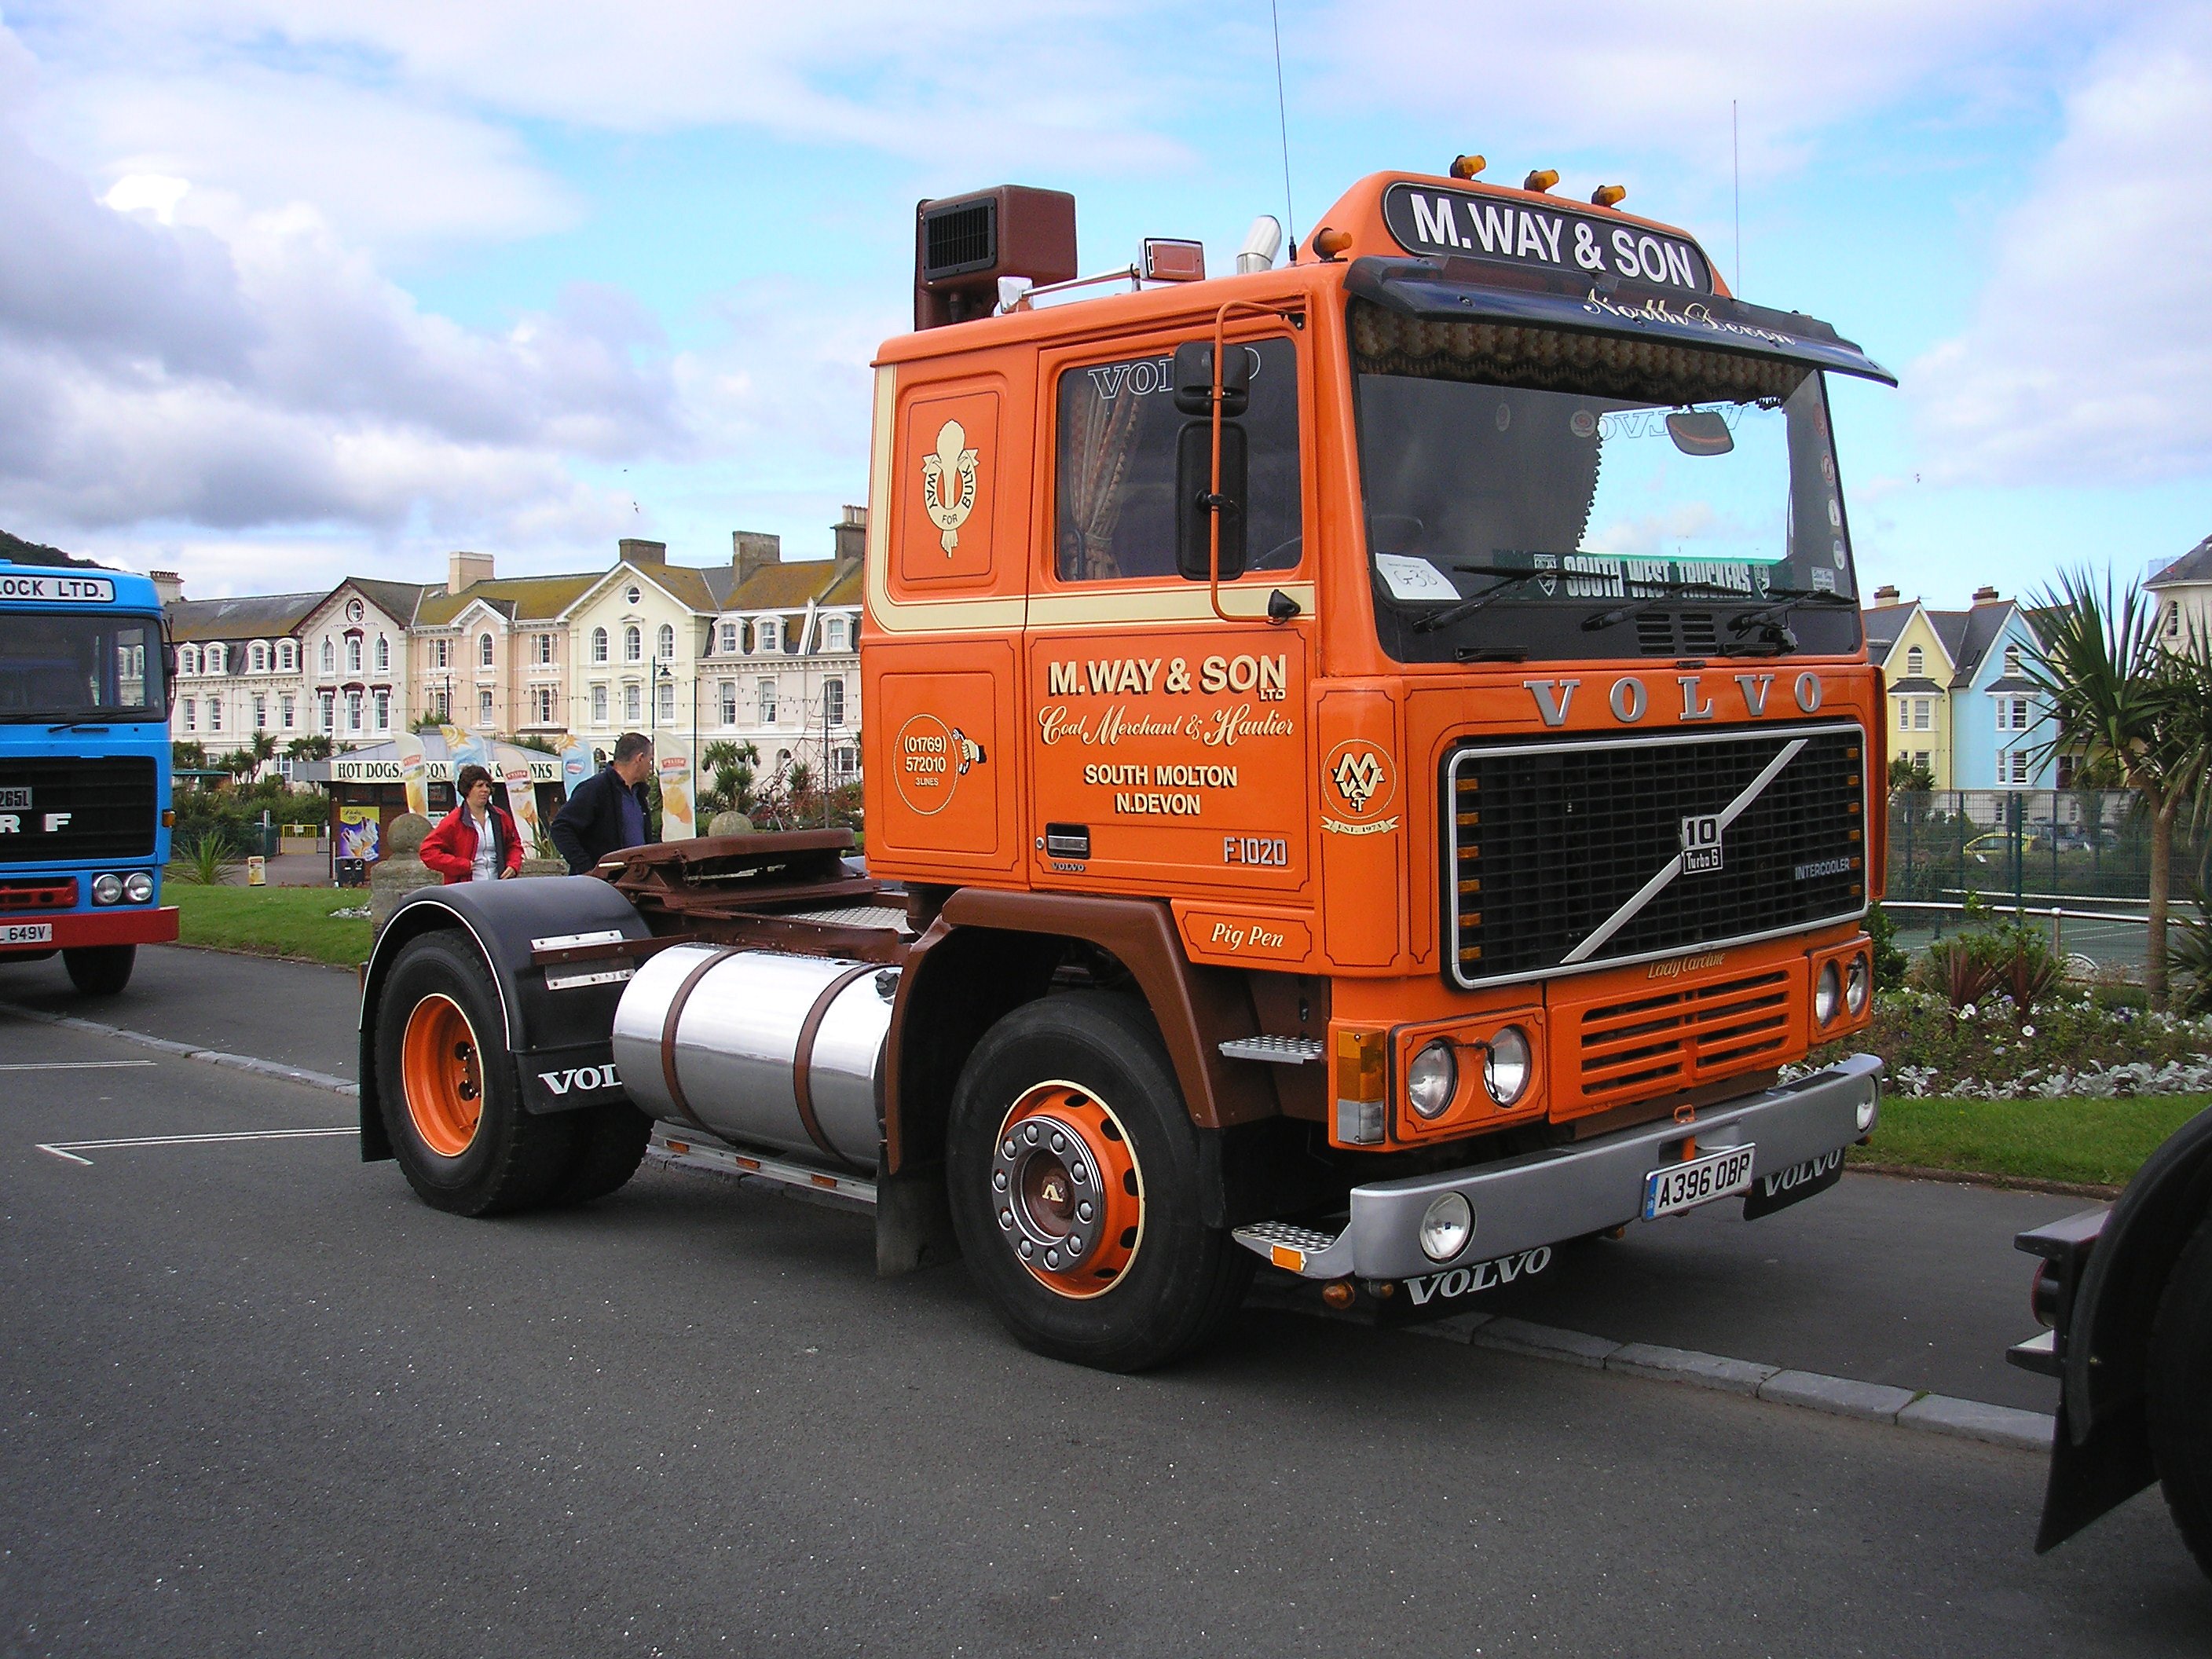 Volvo F-1020 Backgrounds, Compatible - PC, Mobile, Gadgets| 2816x2112 px